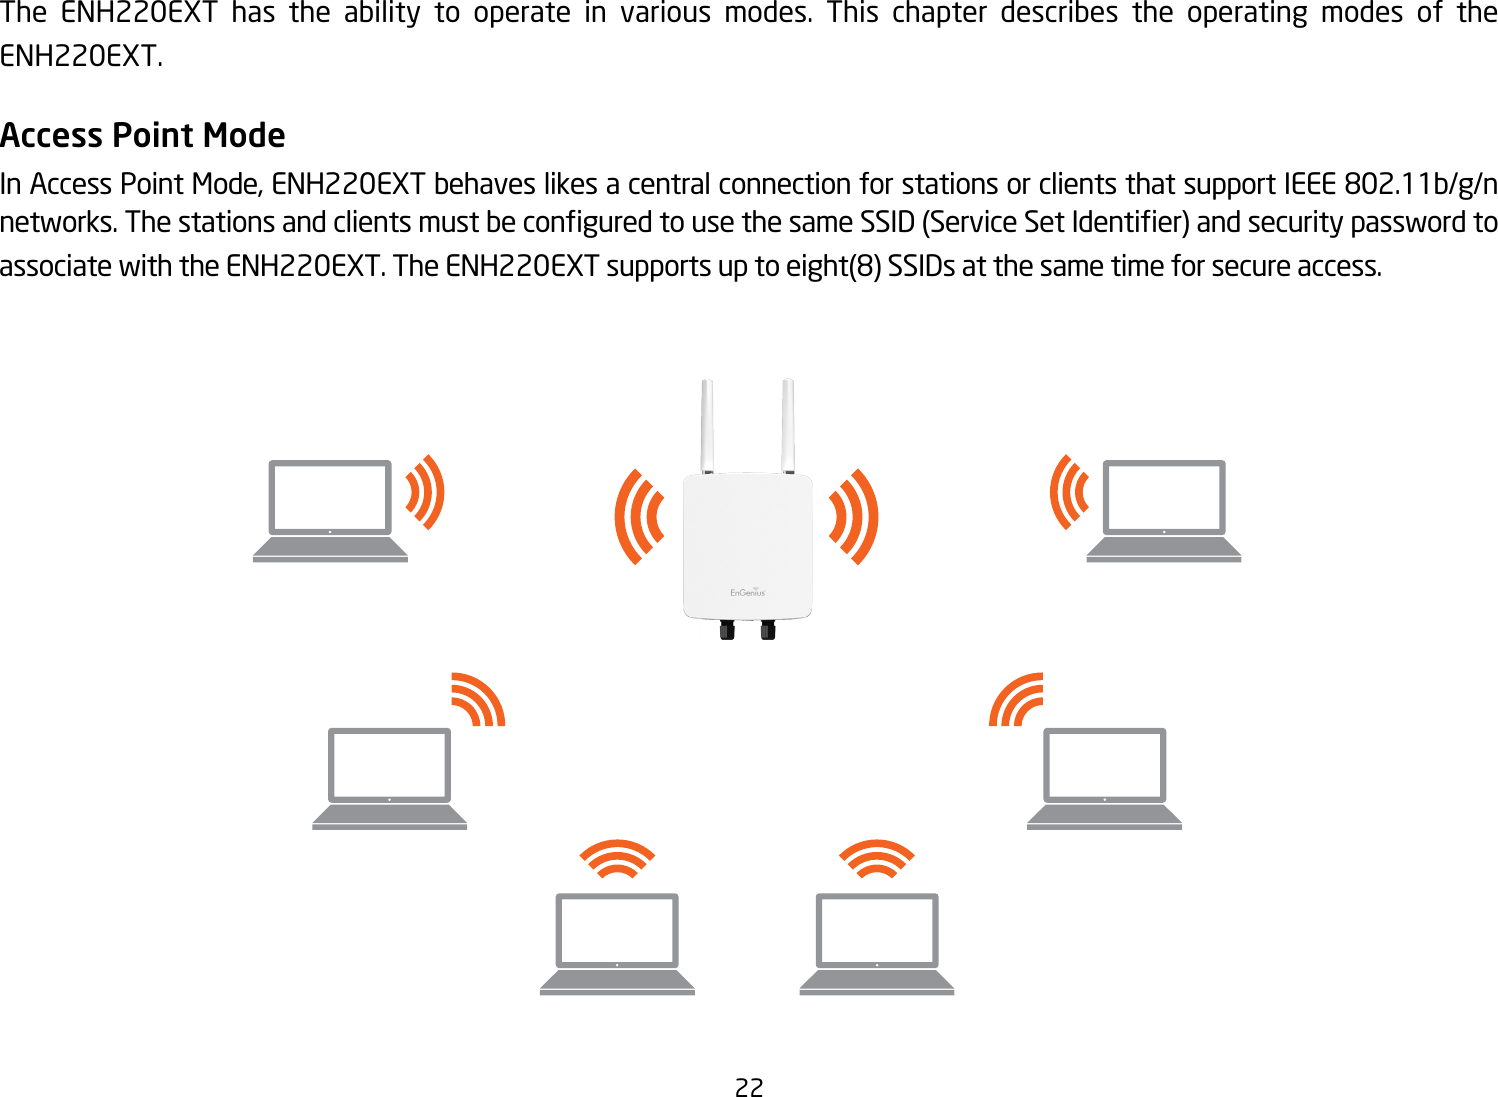 22 The ENH220EXT has the ability to operate in various modes. This chapter describes the operating modes of the ENH220EXT.Access Point ModeIn Access Point Mode, ENH220EXT behaves likes a central connection for stations or clients that support IEEE 802.11b/g/n networks.ThestationsandclientsmustbeconguredtousethesameSSID(ServiceSetIdentier)andsecuritypasswordtoassociatewiththeENH220EXT.TheENH220EXTsupportsuptoeight(8)SSIDsatthesametimeforsecureaccess.  